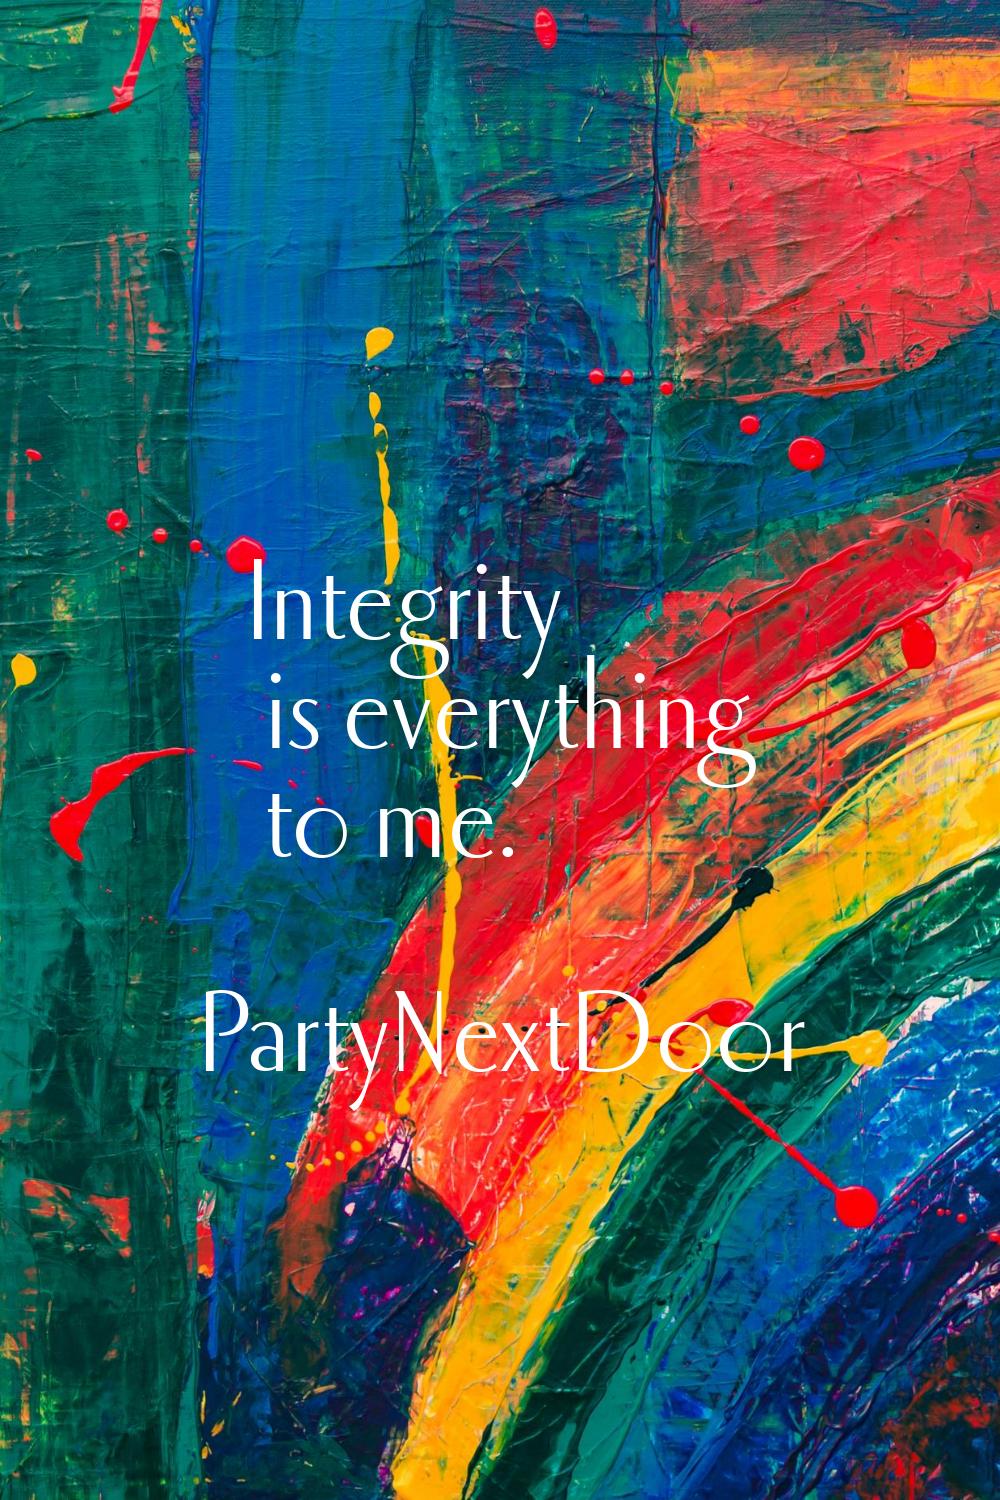 Integrity is everything to me.